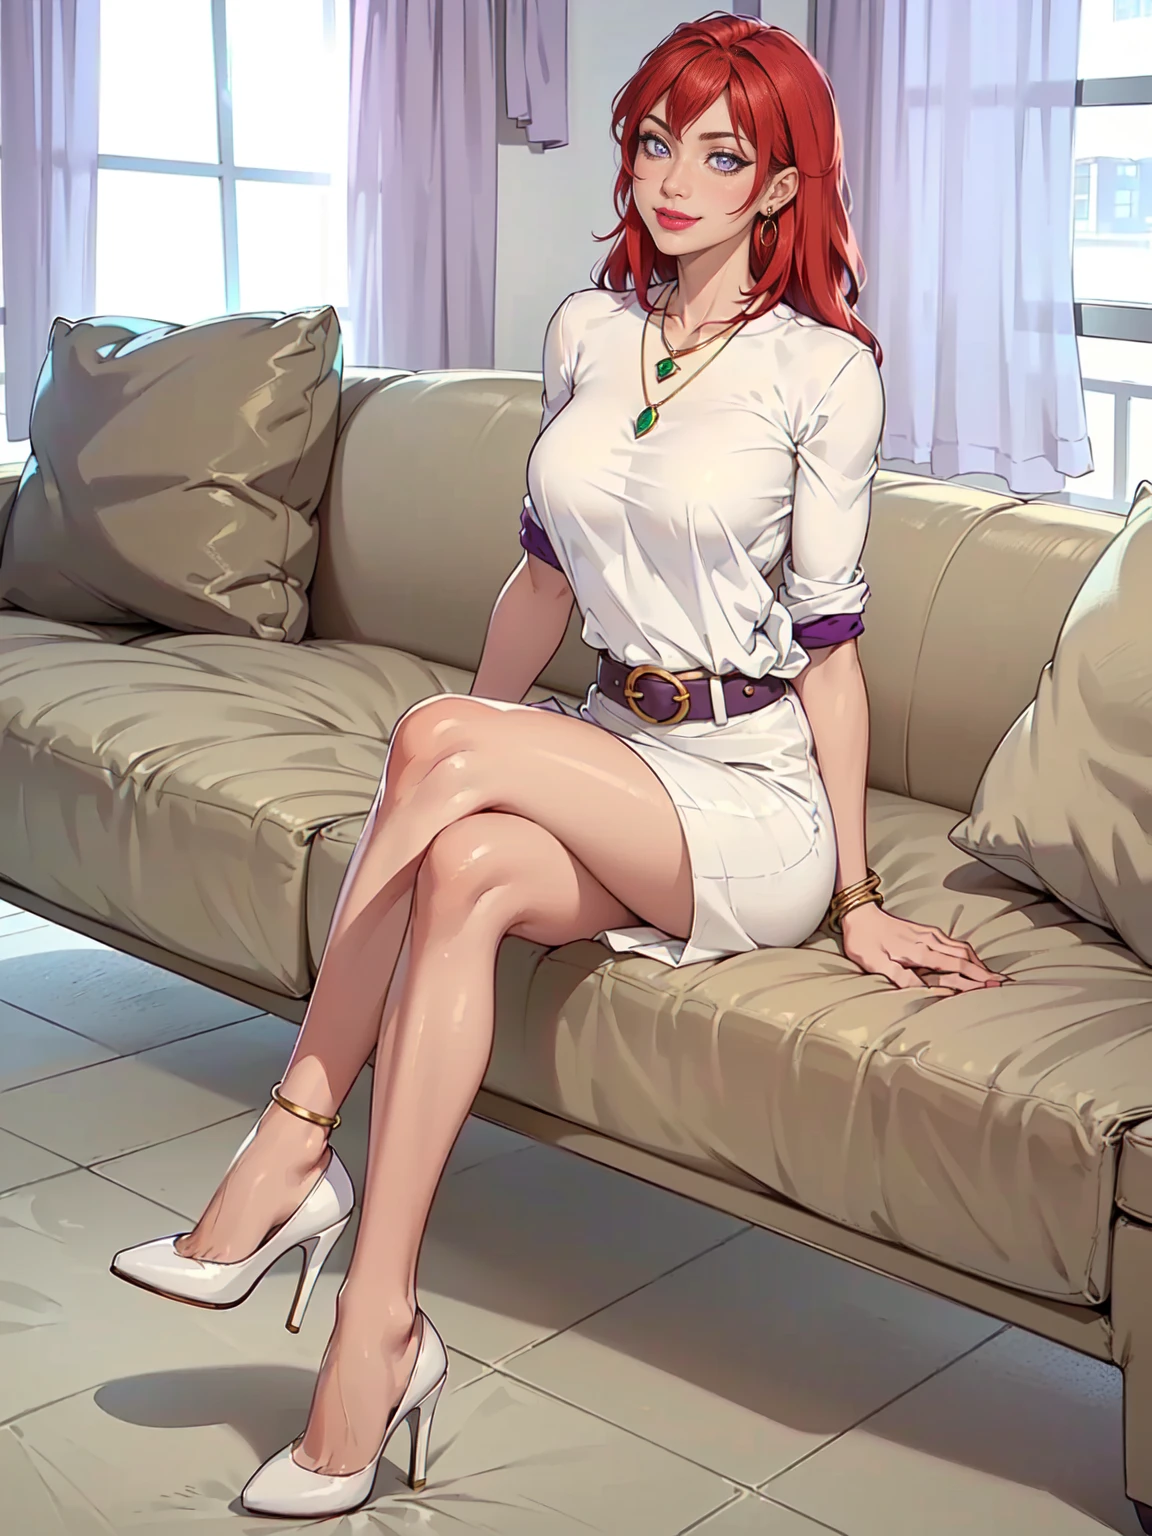  ((solo, 1woman, (TakashiroHiroko, dark purple eyes, red hair, long hair), lipstick, Extremely detailed, ambient soft lighting, 4k, perfect eyes, a perfect face, perfect lighting, a 1girl)), ((solo, (1woman, lipstick), Extremely detailed, ambient soft lighting, 4k, perfect eyes, a perfect face, perfect lighting, a 1girl)), , ((fitness,, shapely body, athletic body, toned body)), ((white shirt, white blouse, white belt, beige skirt, white high heels, gray sofa, windows in the background, apartment, gold jewelry, emerald earrings, bracelets, onyx necklace, rumpled clothes, shy smile))